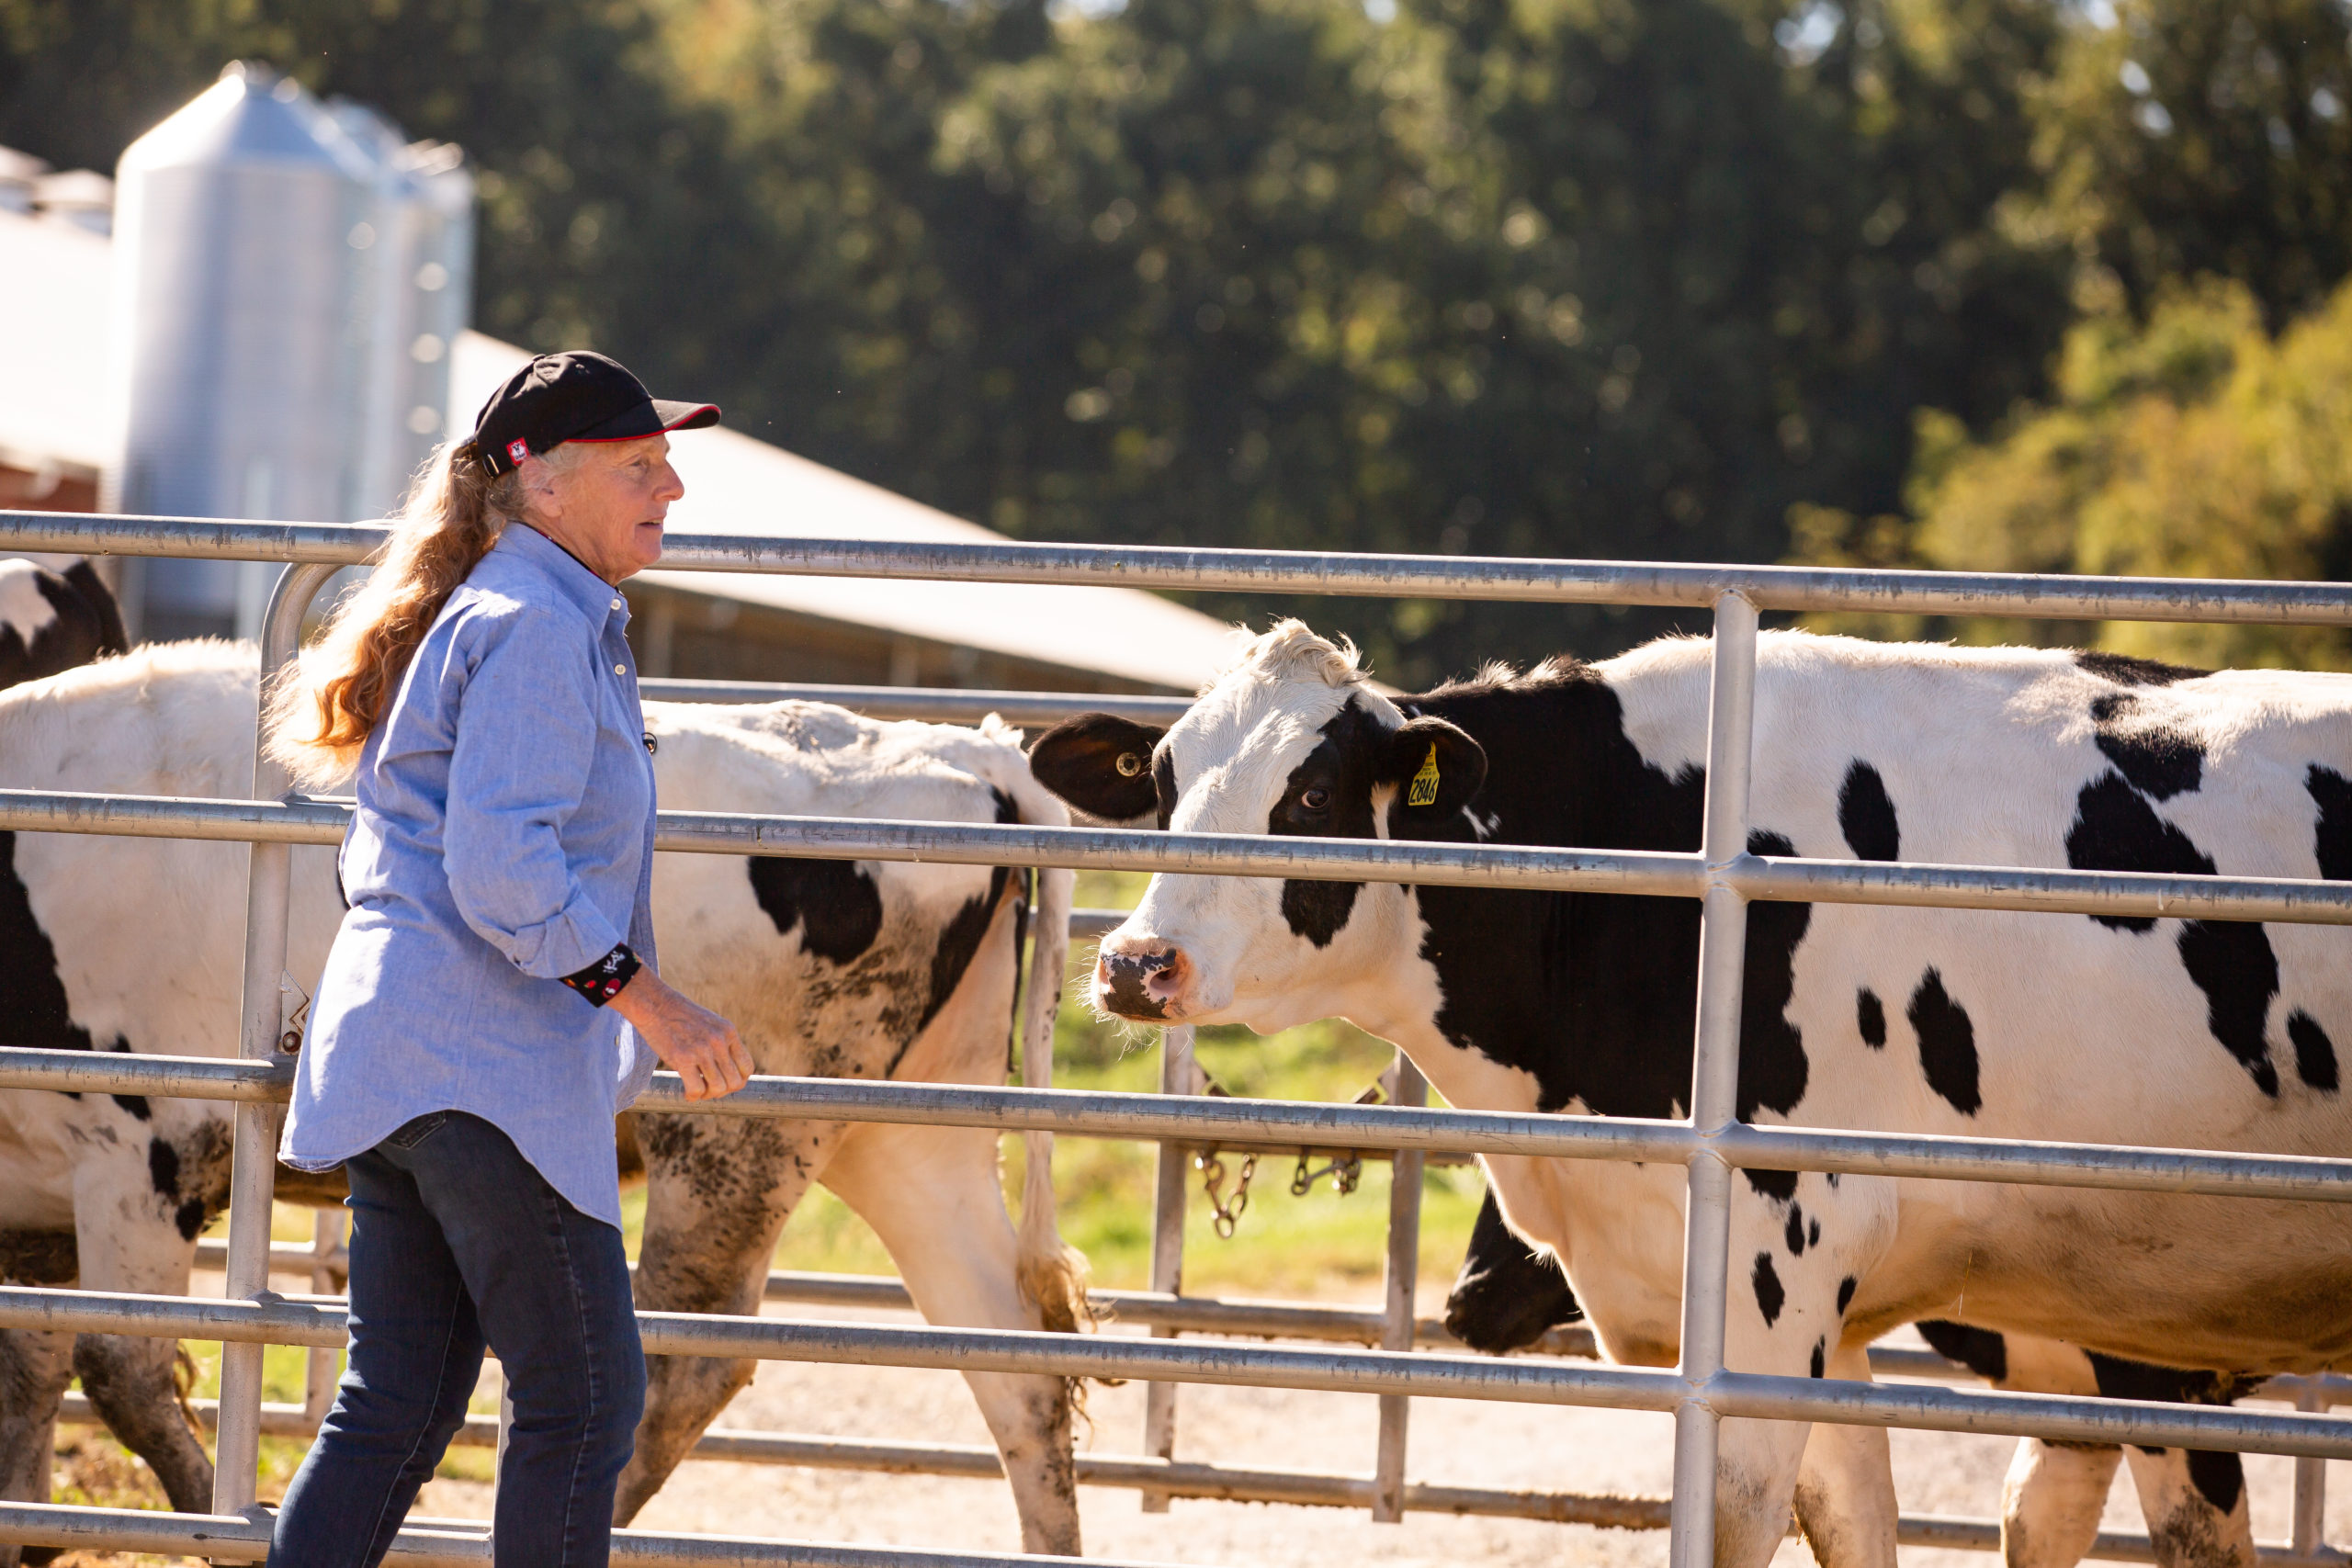 A woman standing in front of a herd of dairy cows outside a barn.